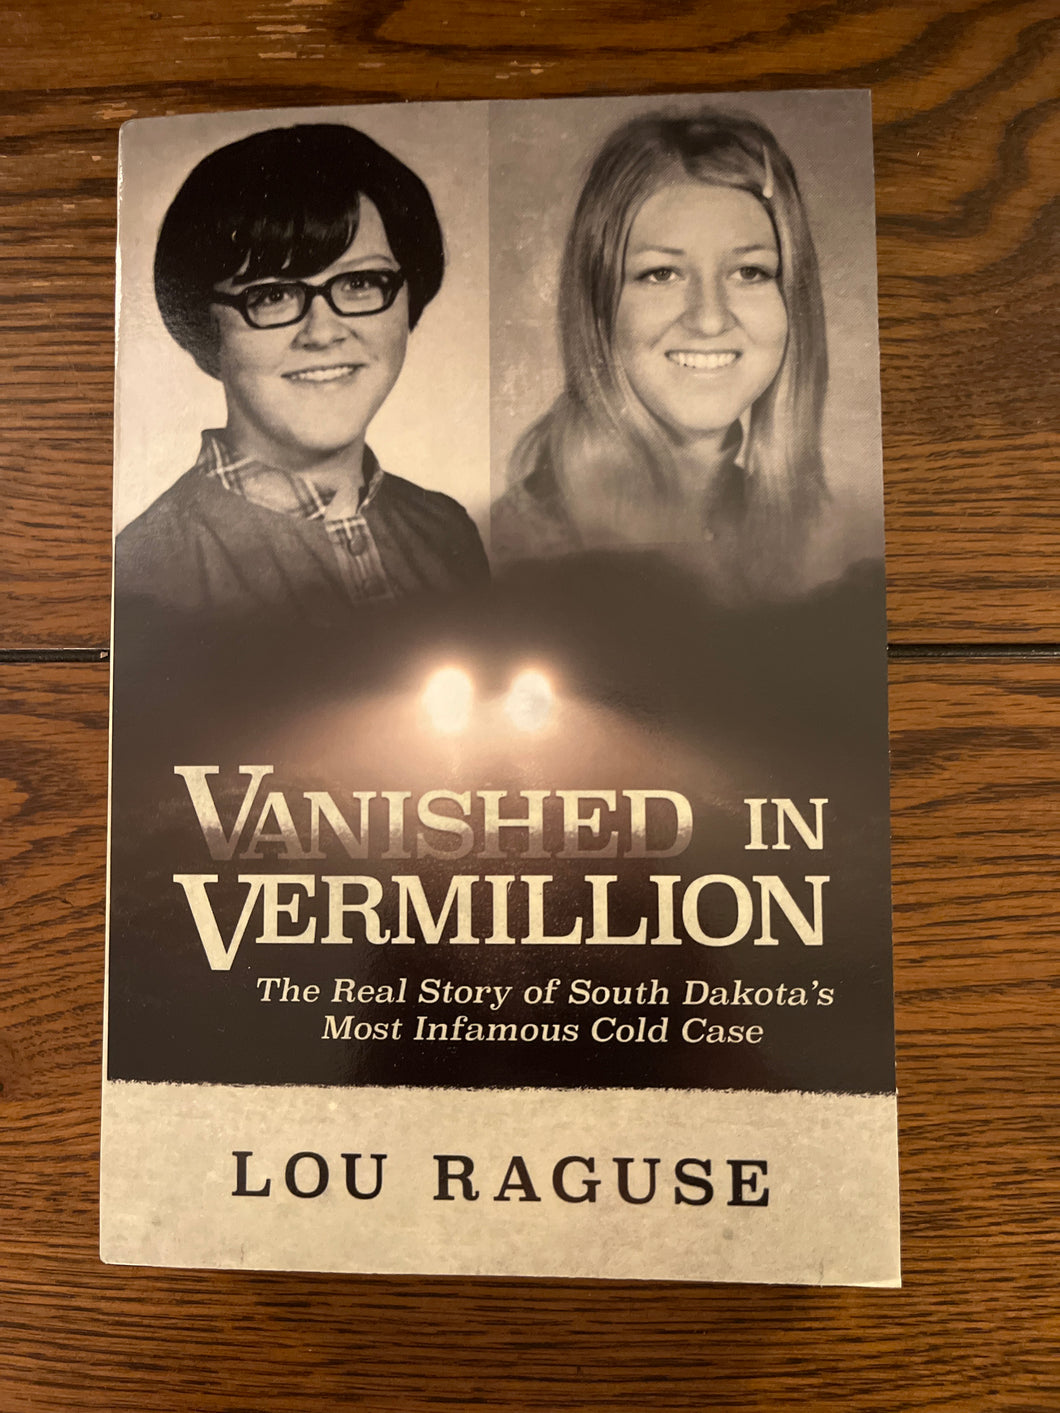 Vanished in Vermillion: The Real Story of South Dakota's Most Infamous Cold Case